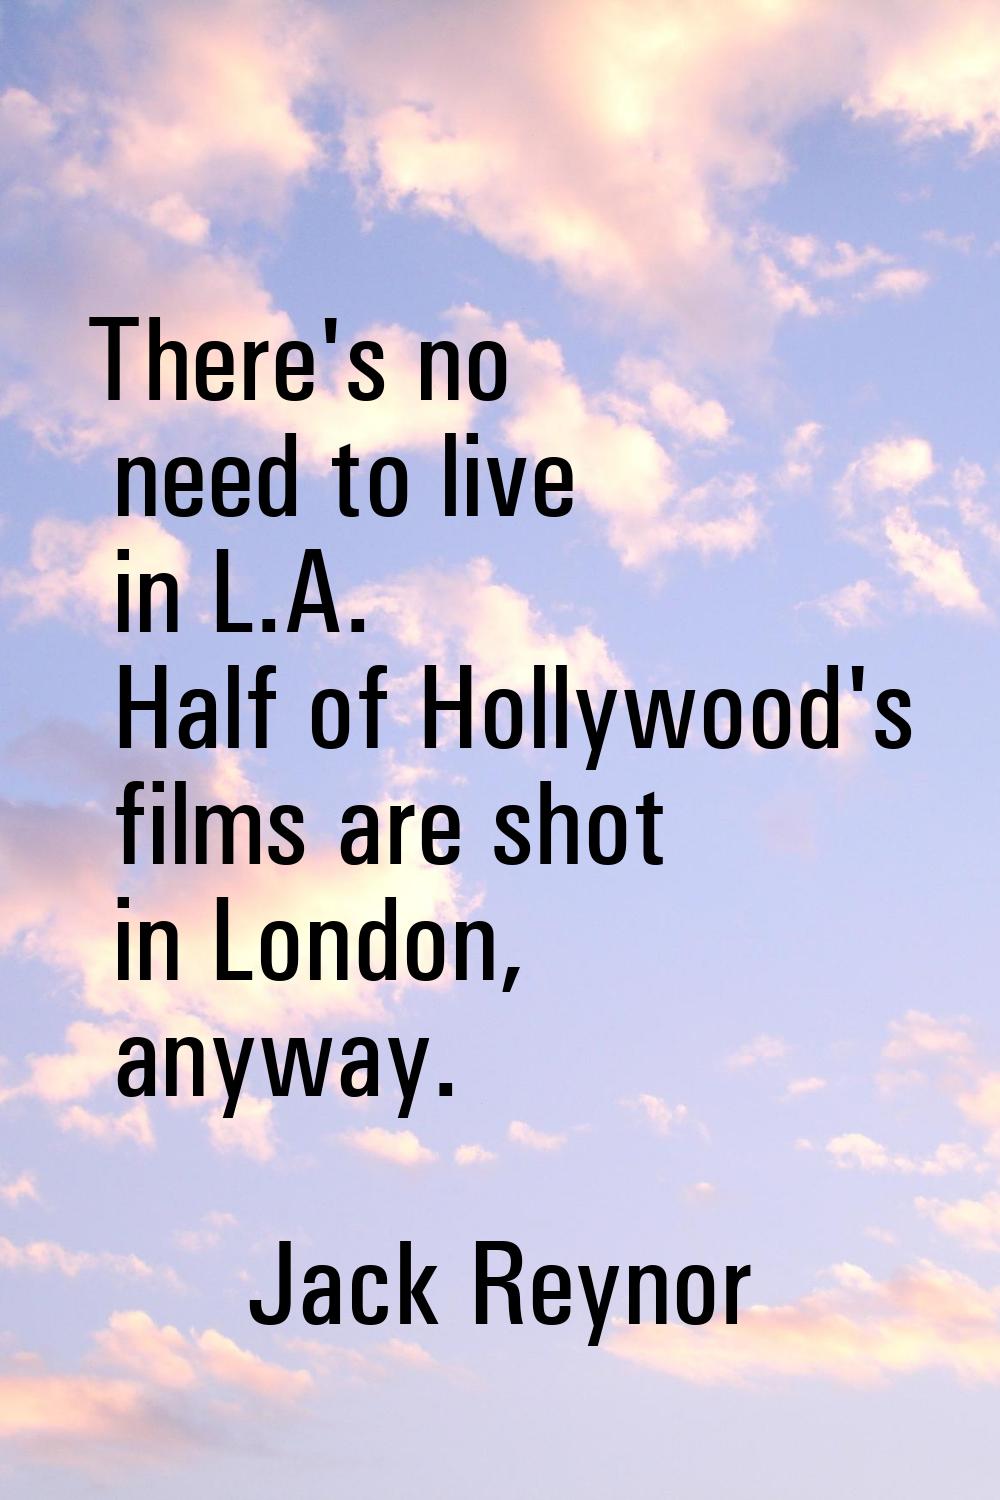 There's no need to live in L.A. Half of Hollywood's films are shot in London, anyway.